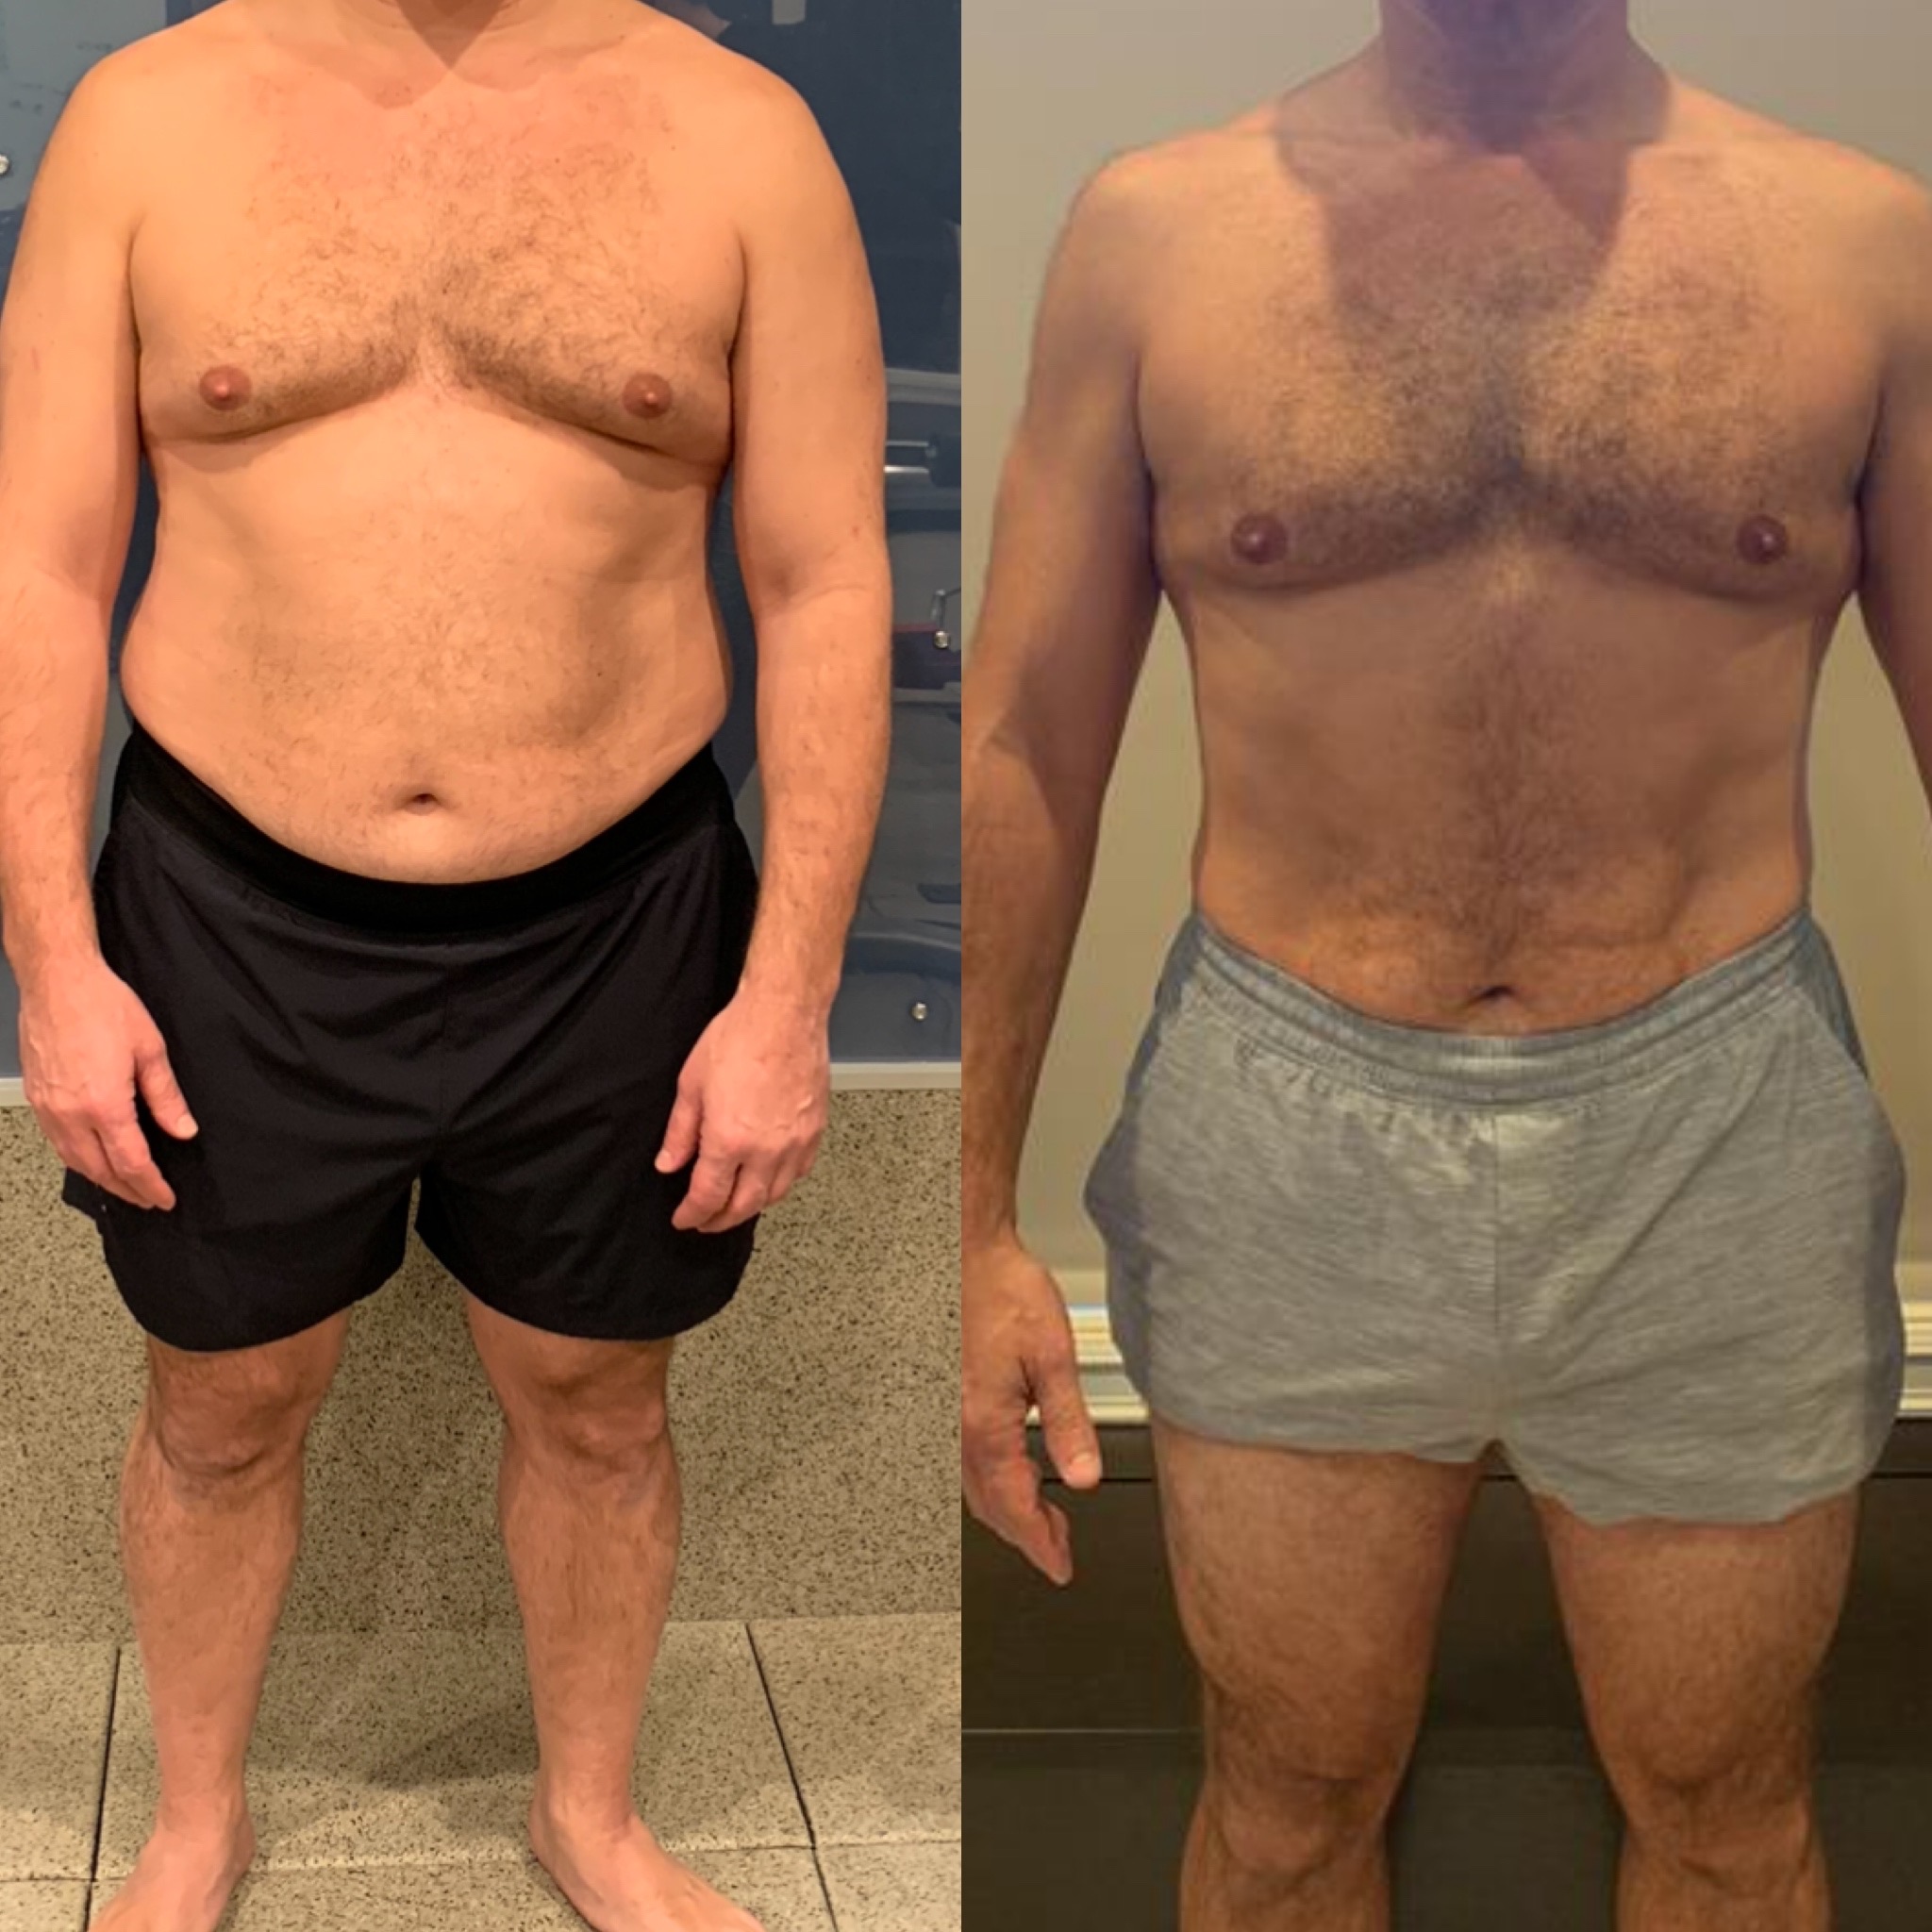 50 year old man weight loss transformation